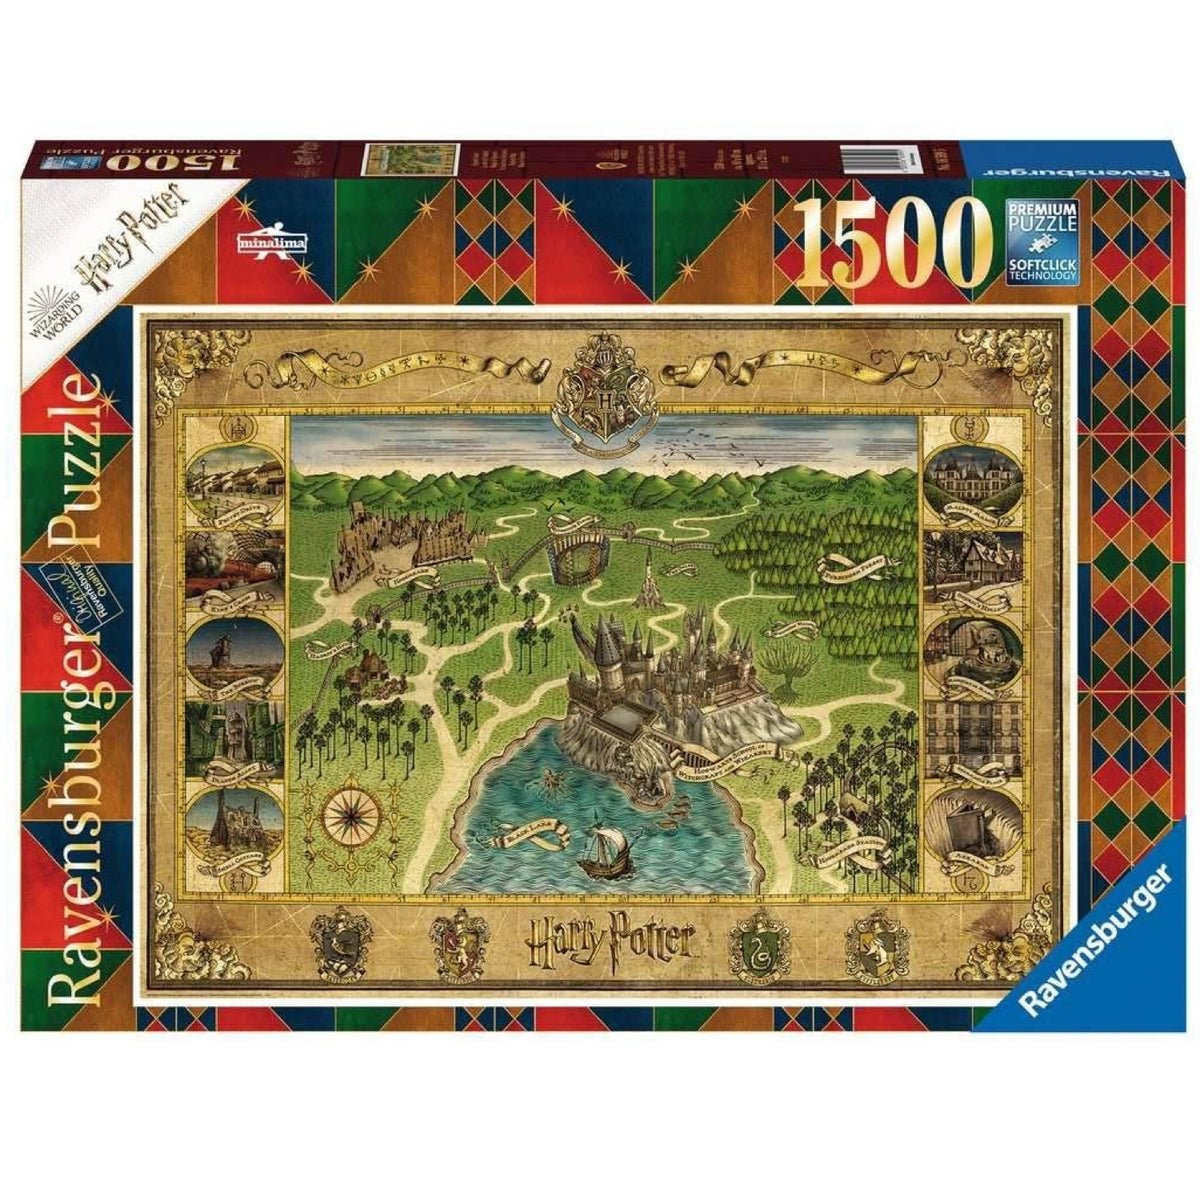 Harry Potter 3D Puzzle Multi Pack - The Burrow, Hagrid's Hut and